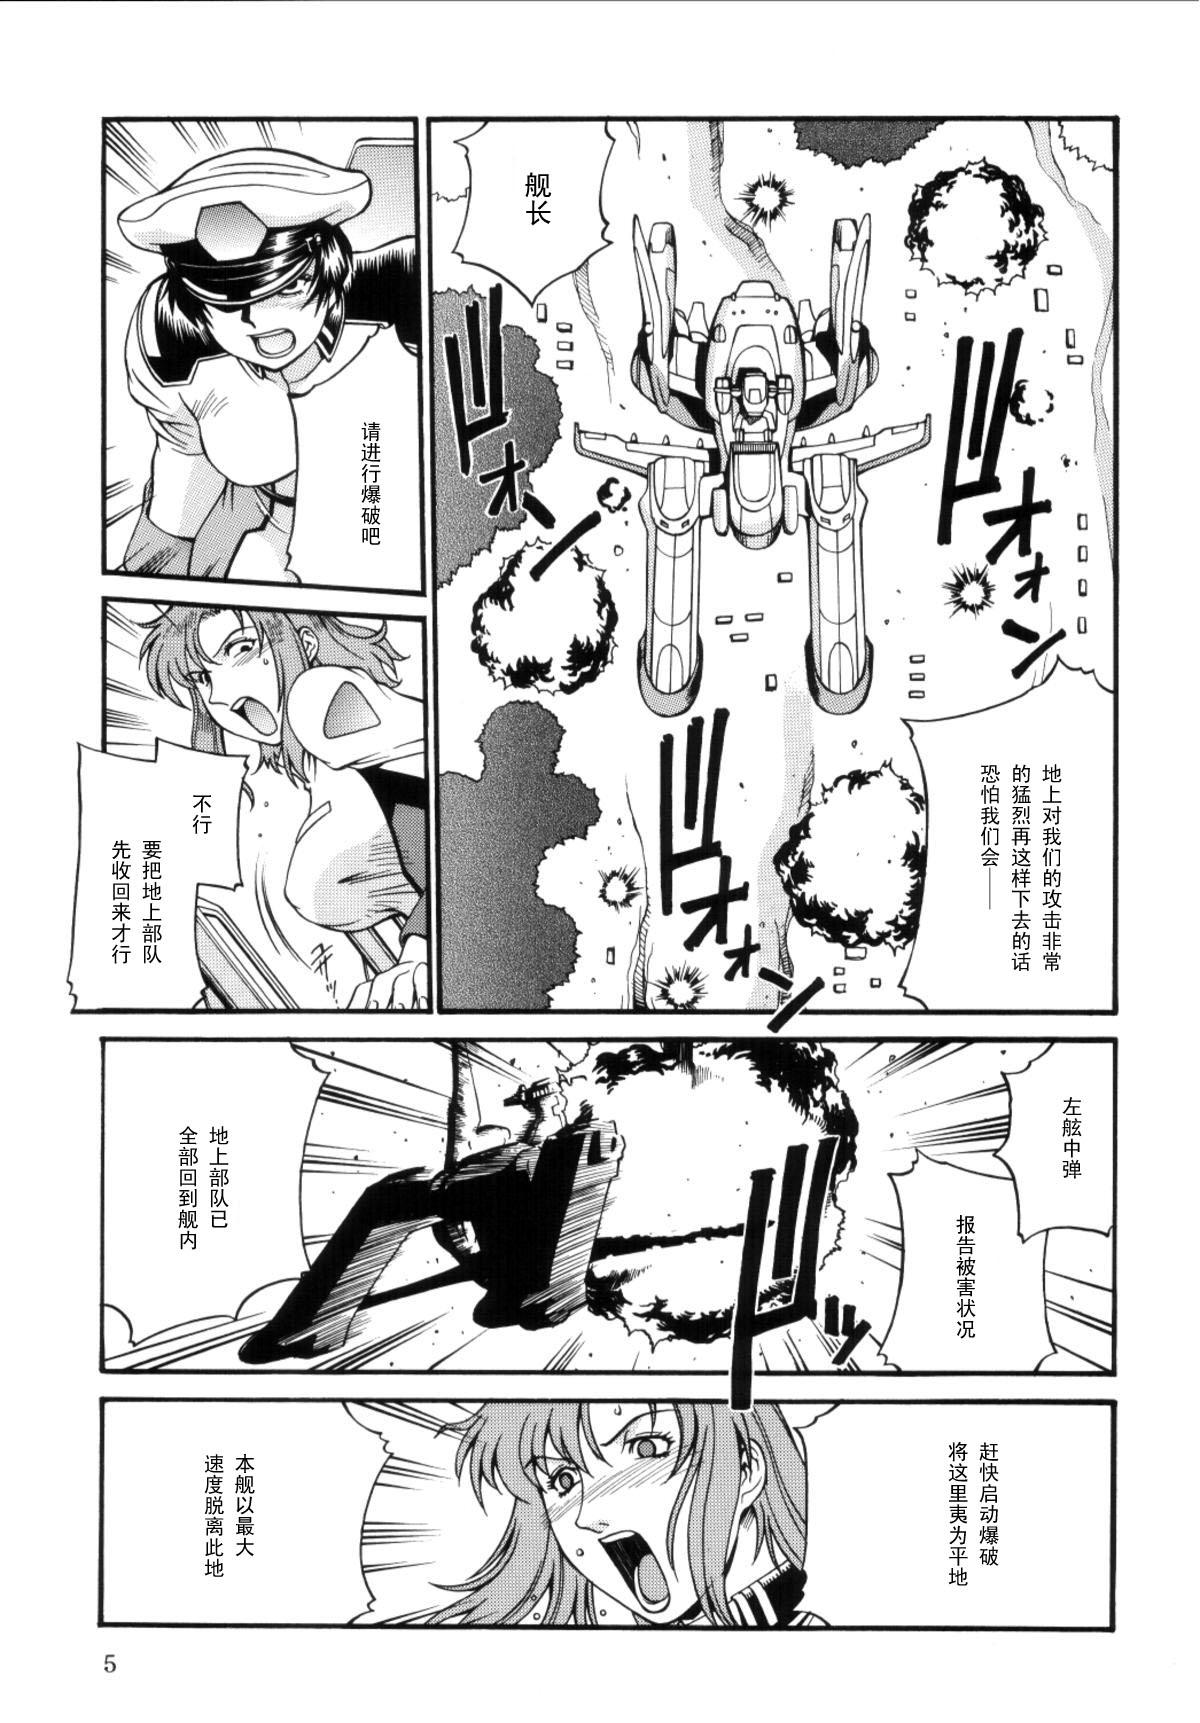 Jerking Off SEED OUT - Gundam seed Cartoon - Page 5